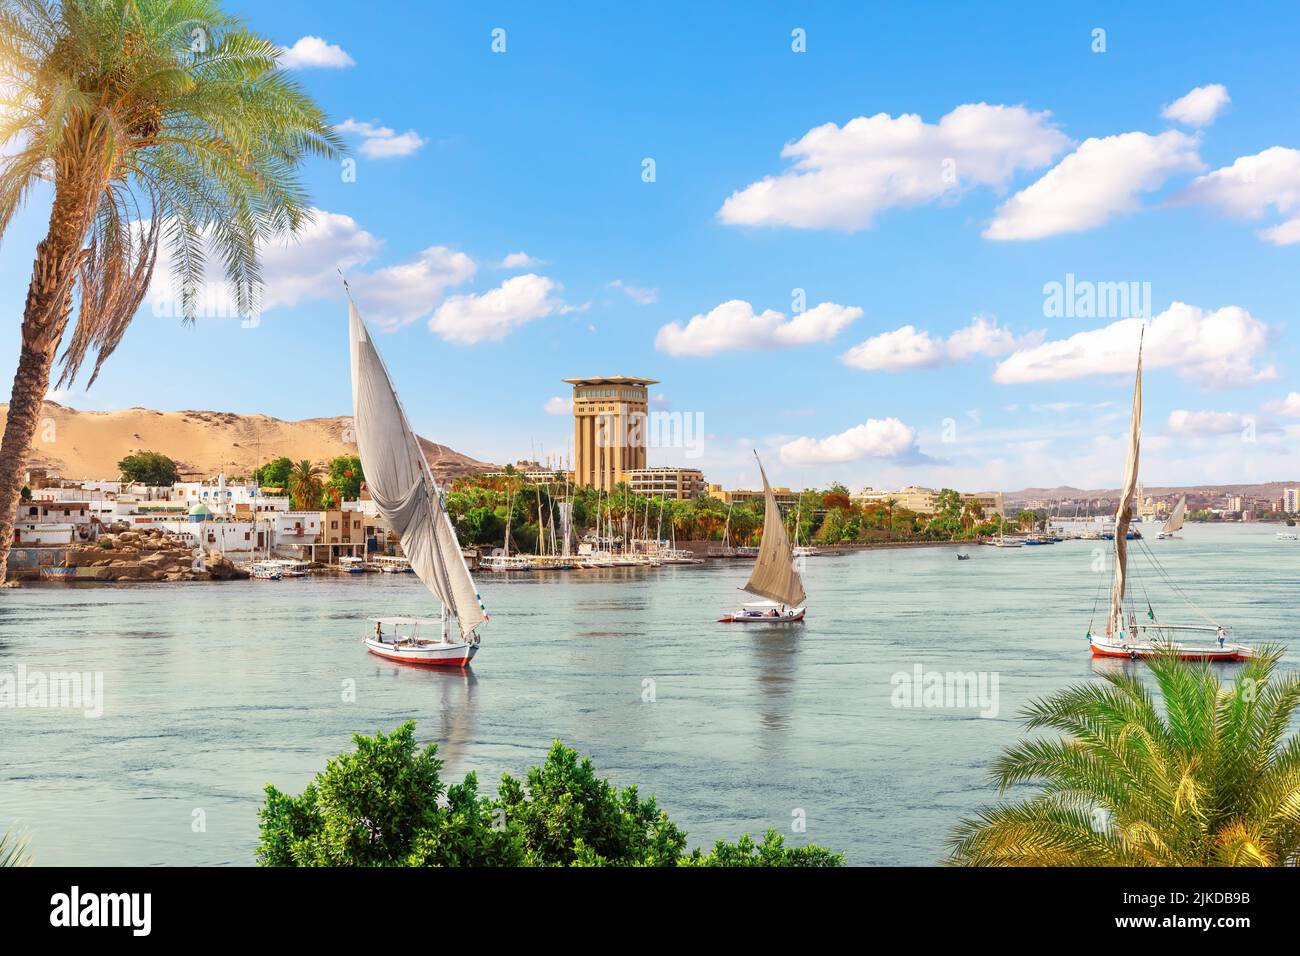 Traditional sailboats in the Nile river by the villages of Aswan, Egypt. Stock Photo